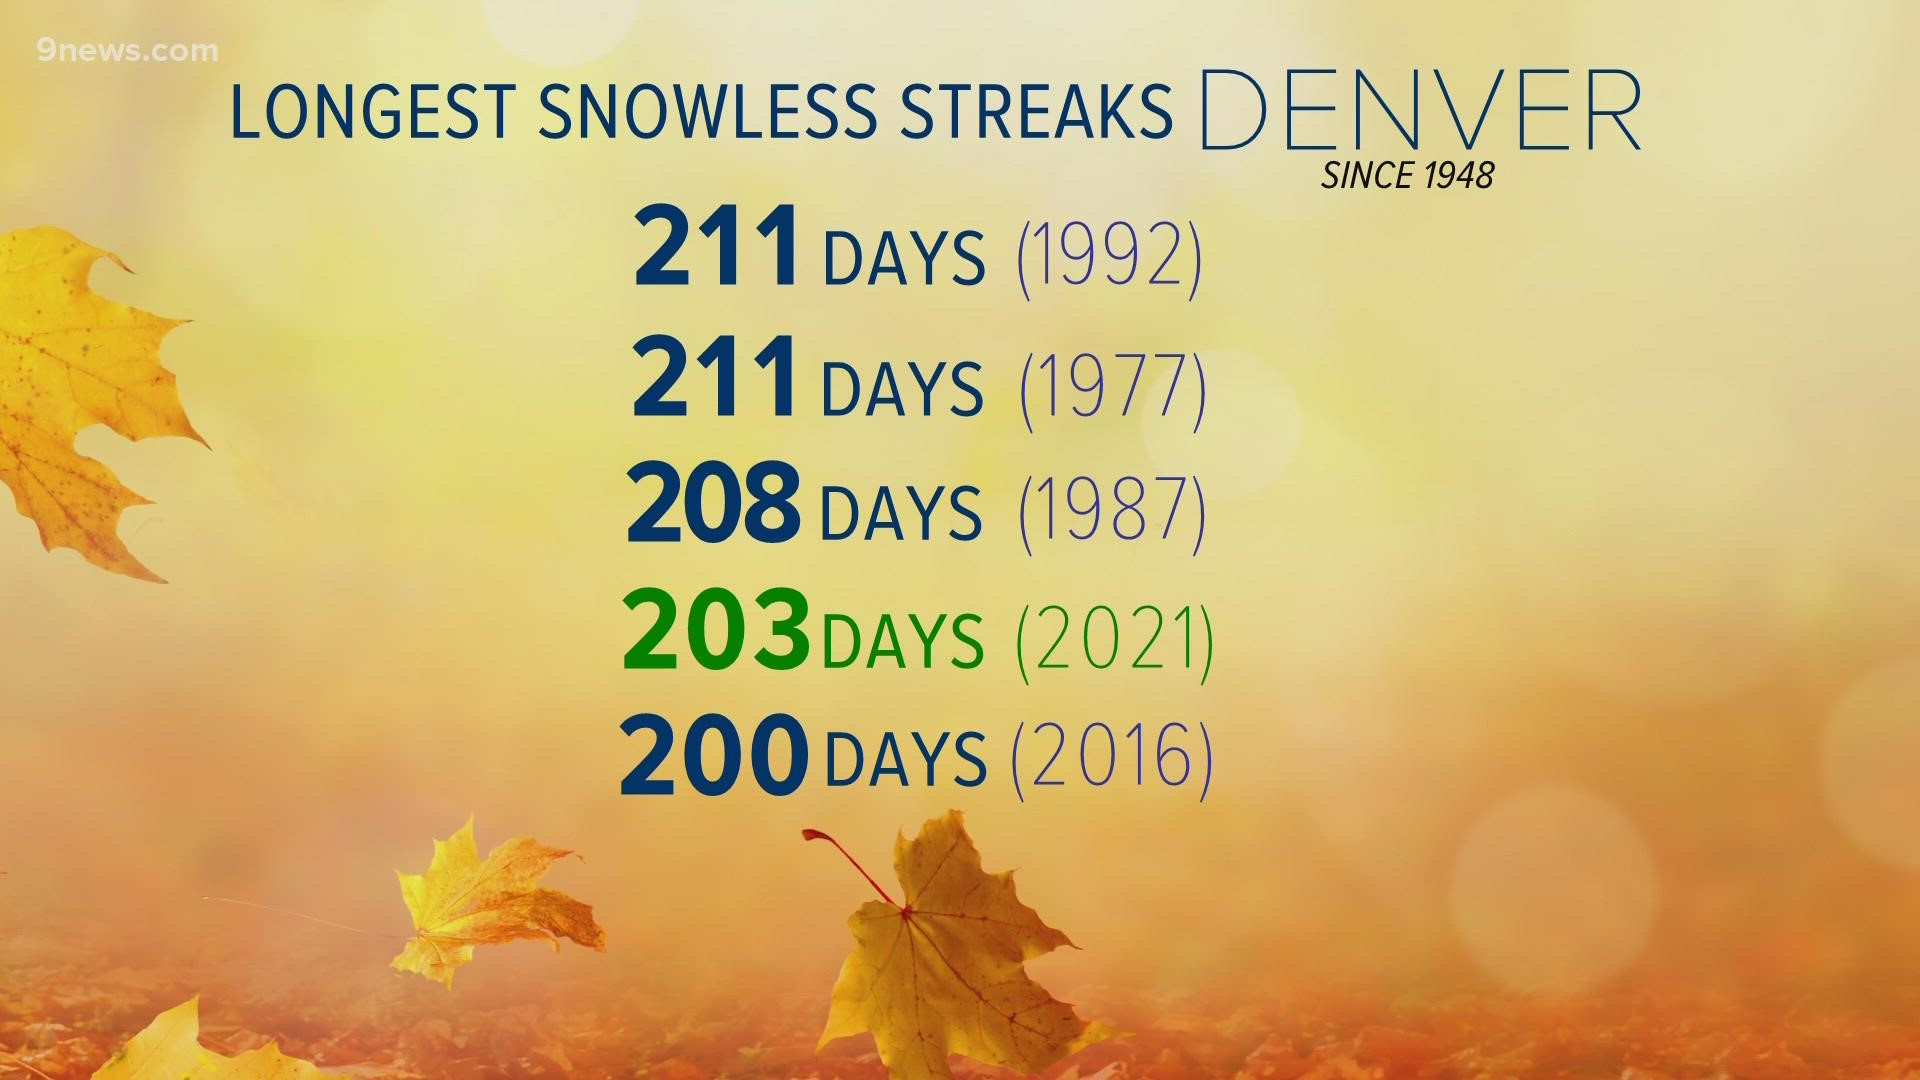 It's been 203 days since Denver has seen snowflakes falling – closing in on a record for the city.